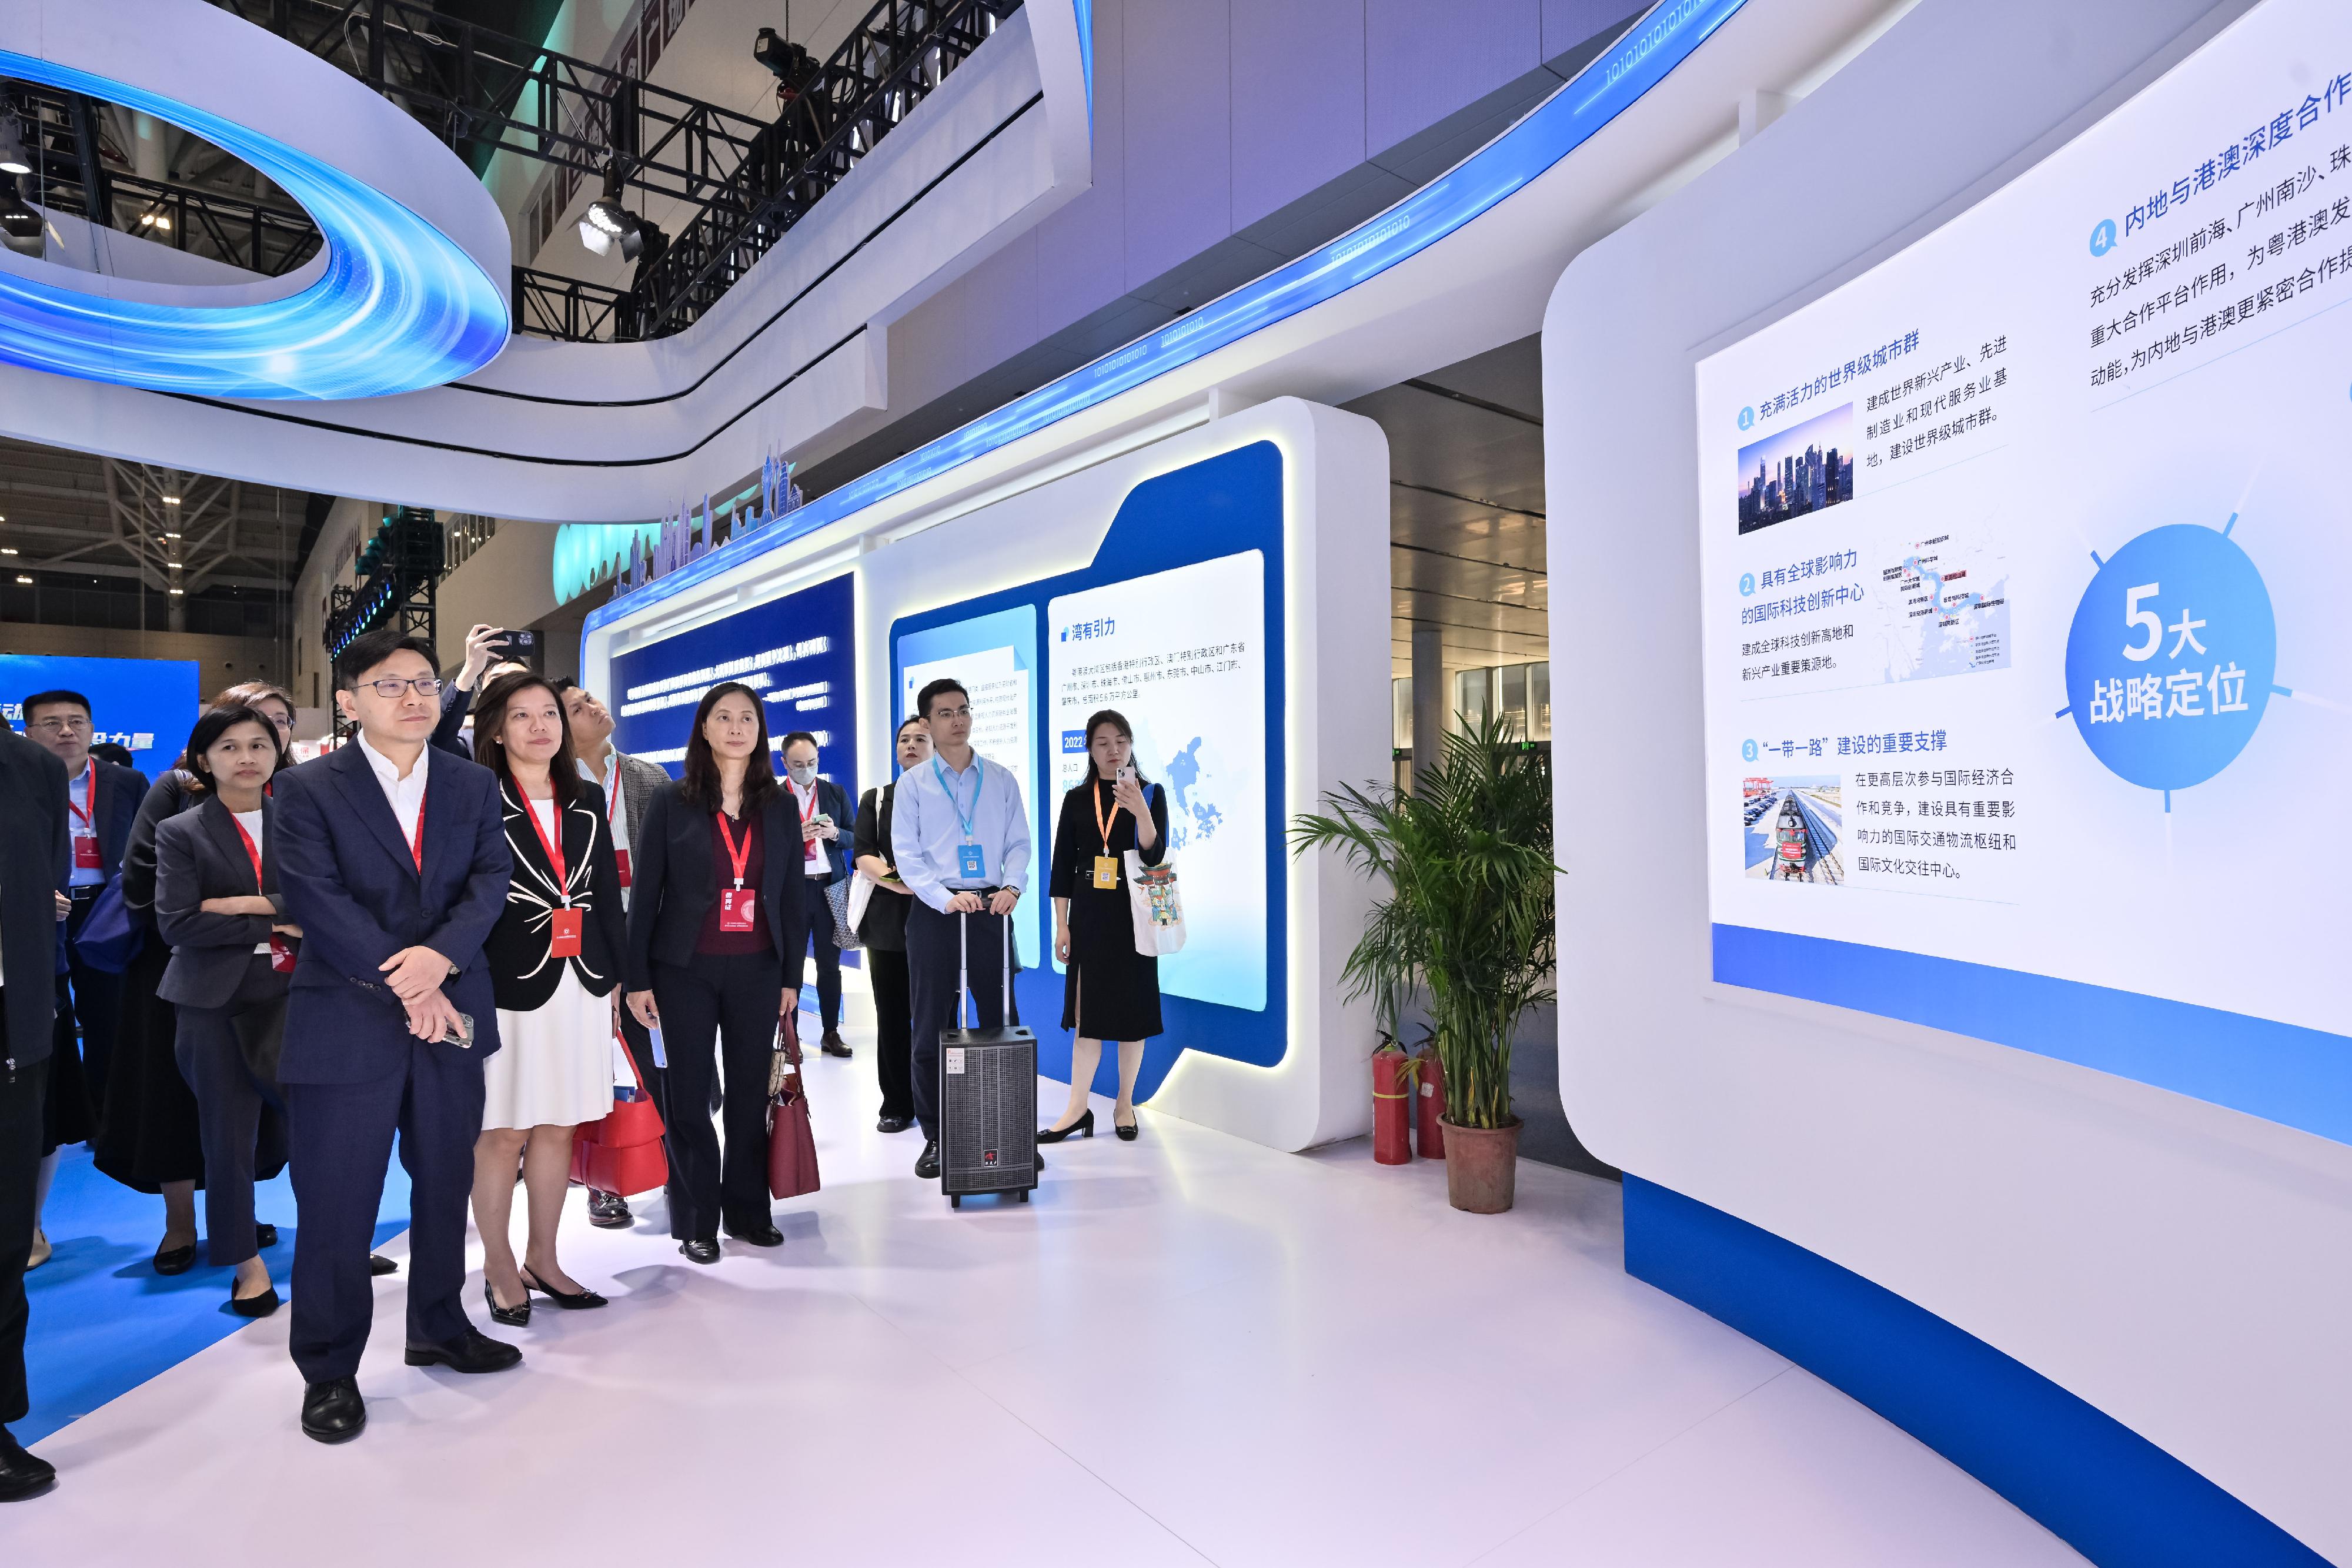 The Secretary for Labour and Welfare, Mr Chris Sun, today (November 22) led a Hong Kong Special Administrative Region delegation to attend the 2nd National Conference on the Development of Human Resources Services in Shenzhen. Photo shows Mr Sun (front row, first left) and the Commissioner for Labour, Ms May Chan (front row, second left), touring the exhibition this morning to learn more about the strategic positioning of the Guangdong-Hong Kong-Macao Greater Bay Area and the planning of talent development work.